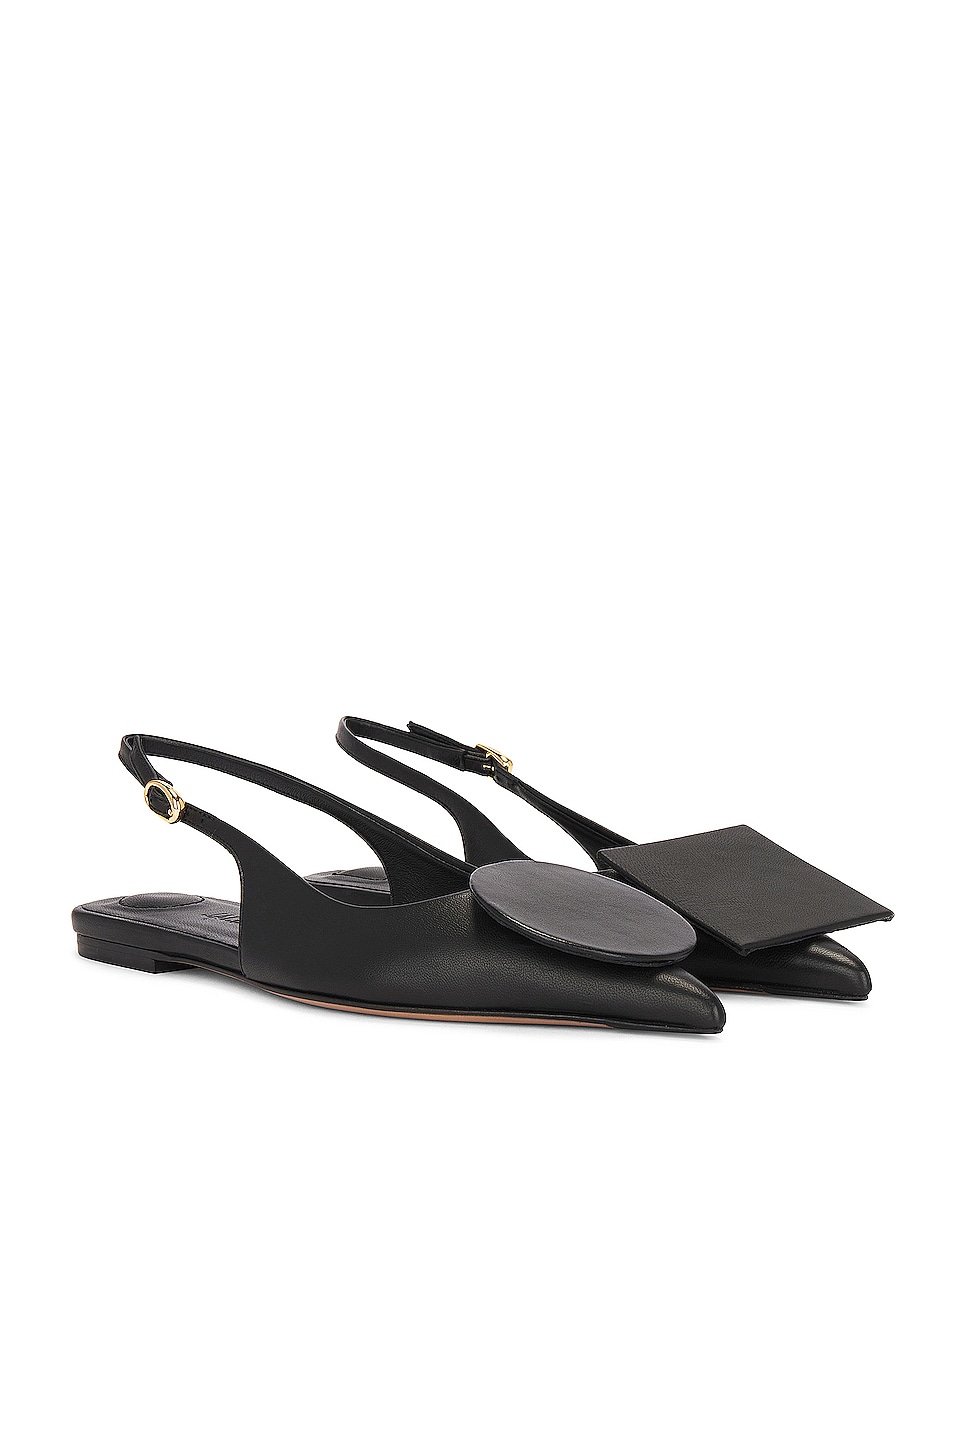 Image 1 of JACQUEMUS Les Slingbacks Duelo P in Black